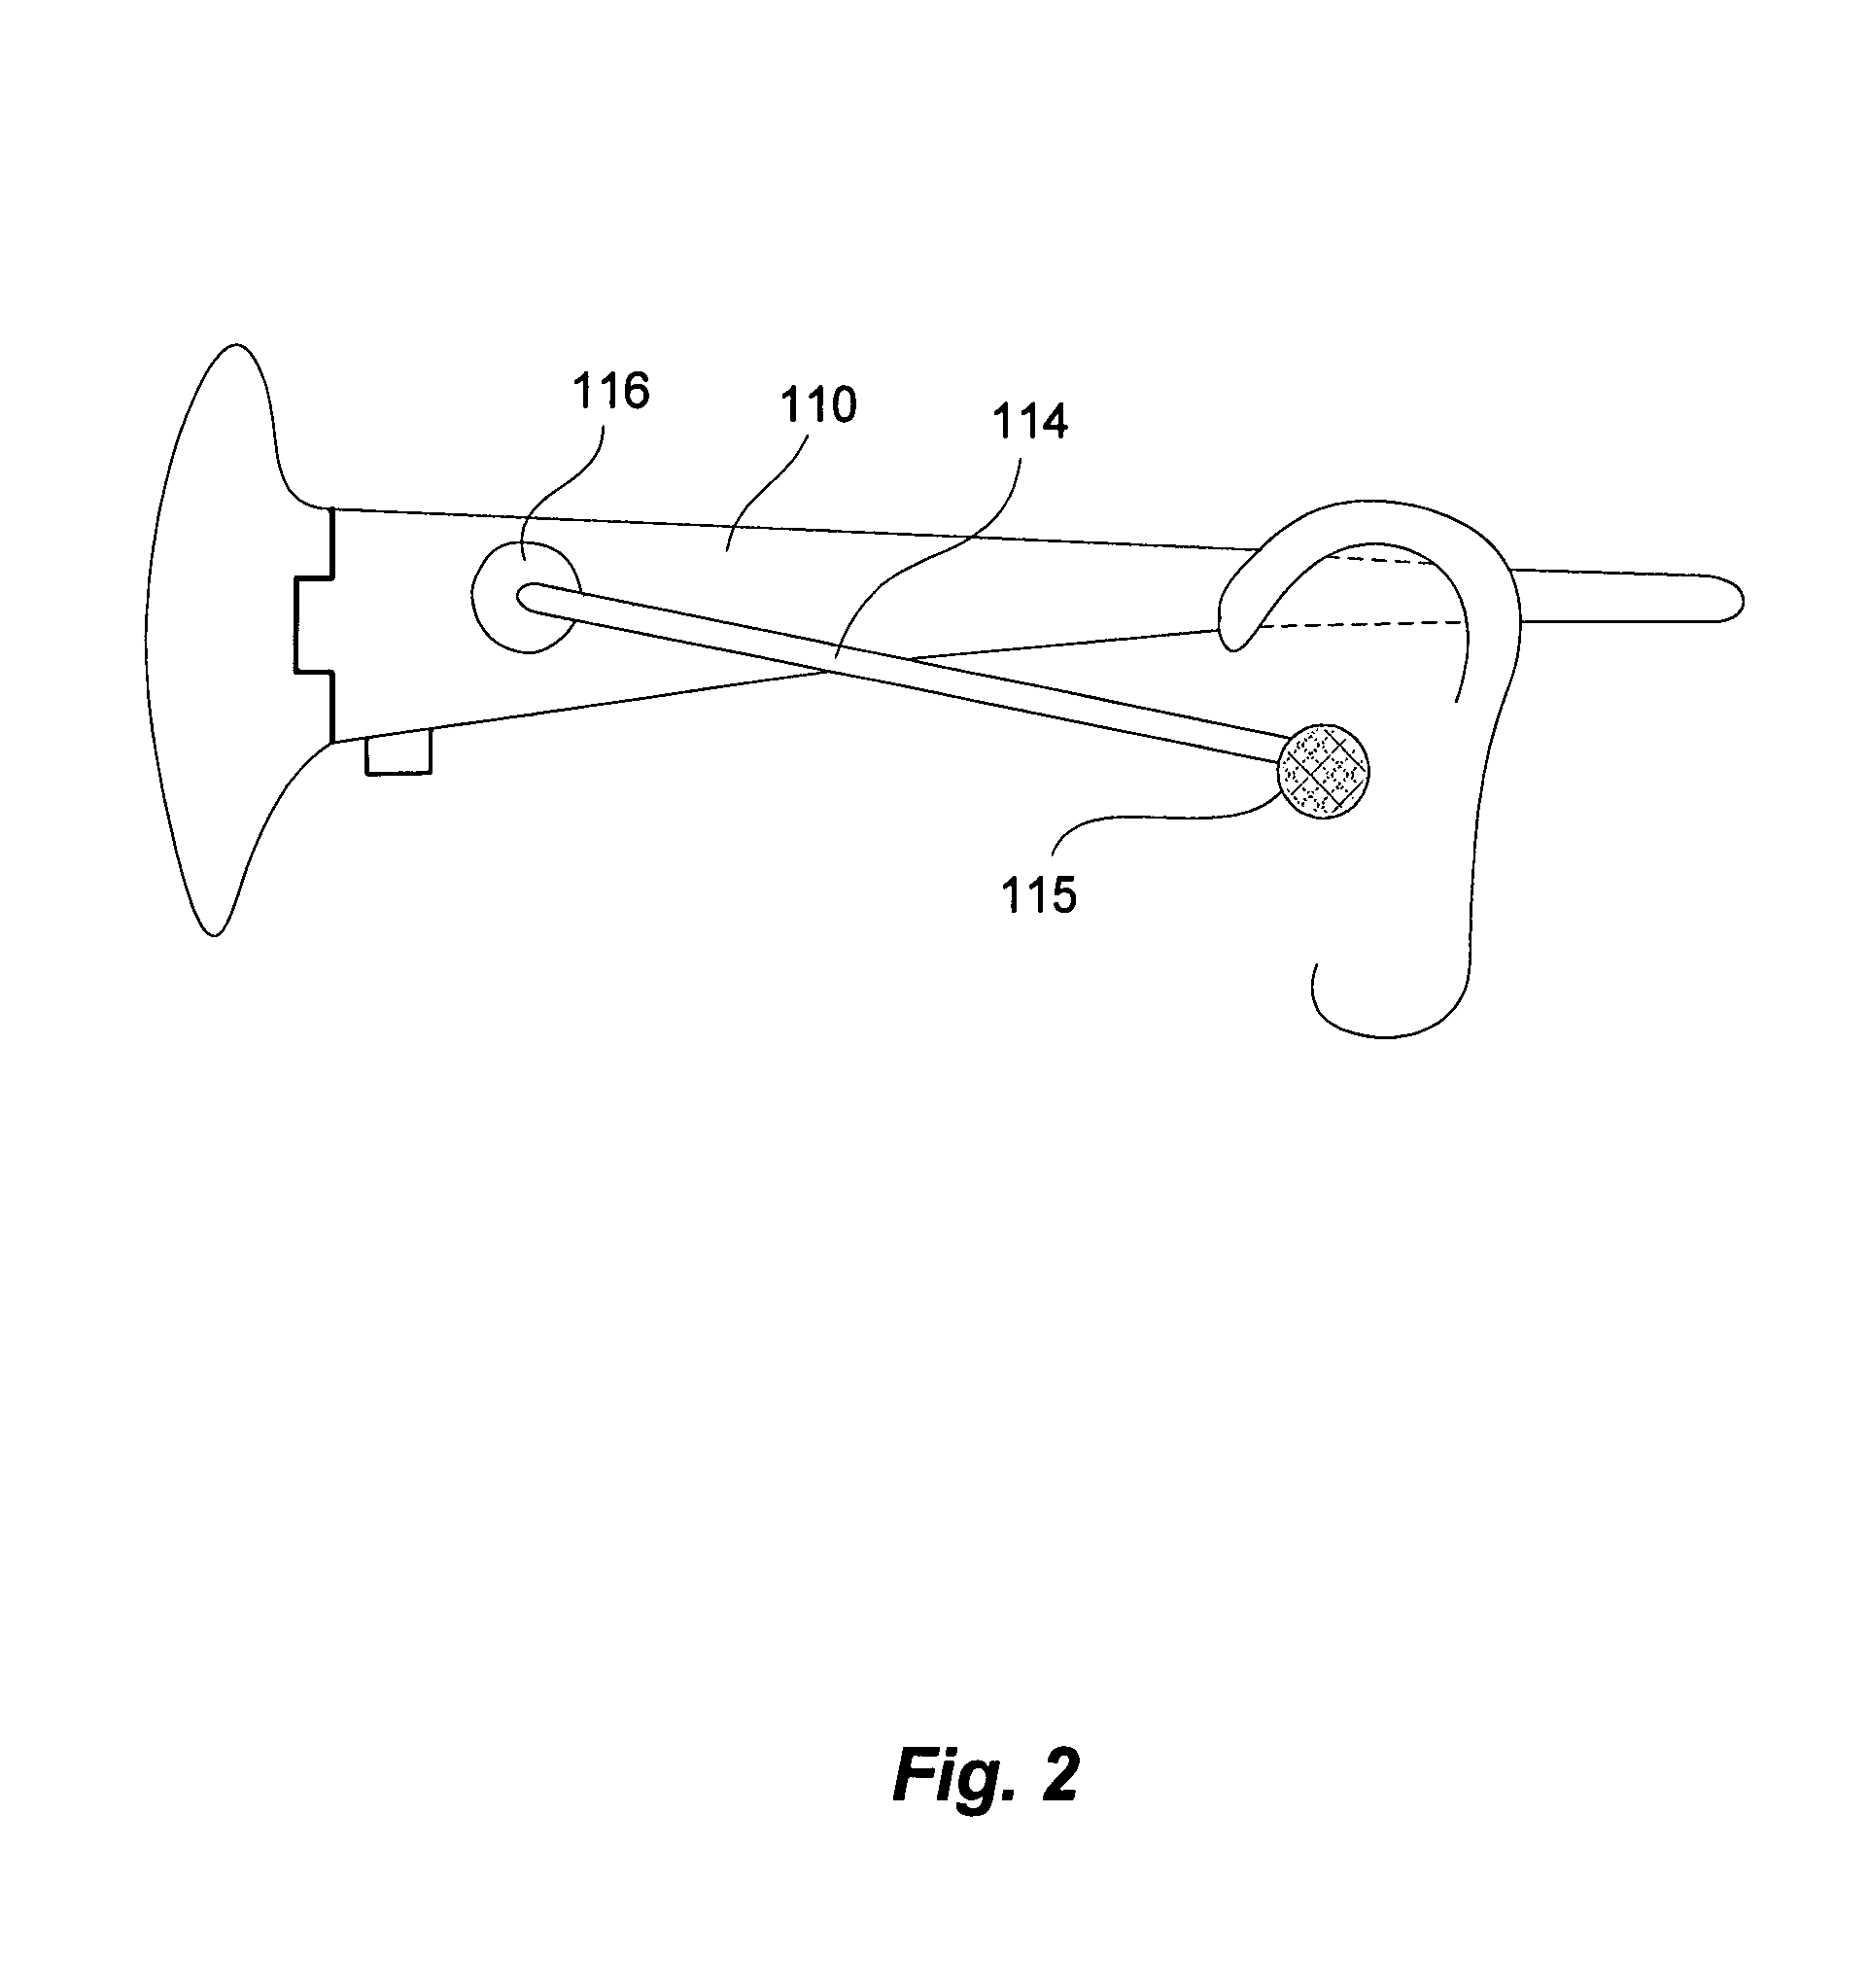 Eyeglasses with hearing enhanced and other audio signal-generating capabilities